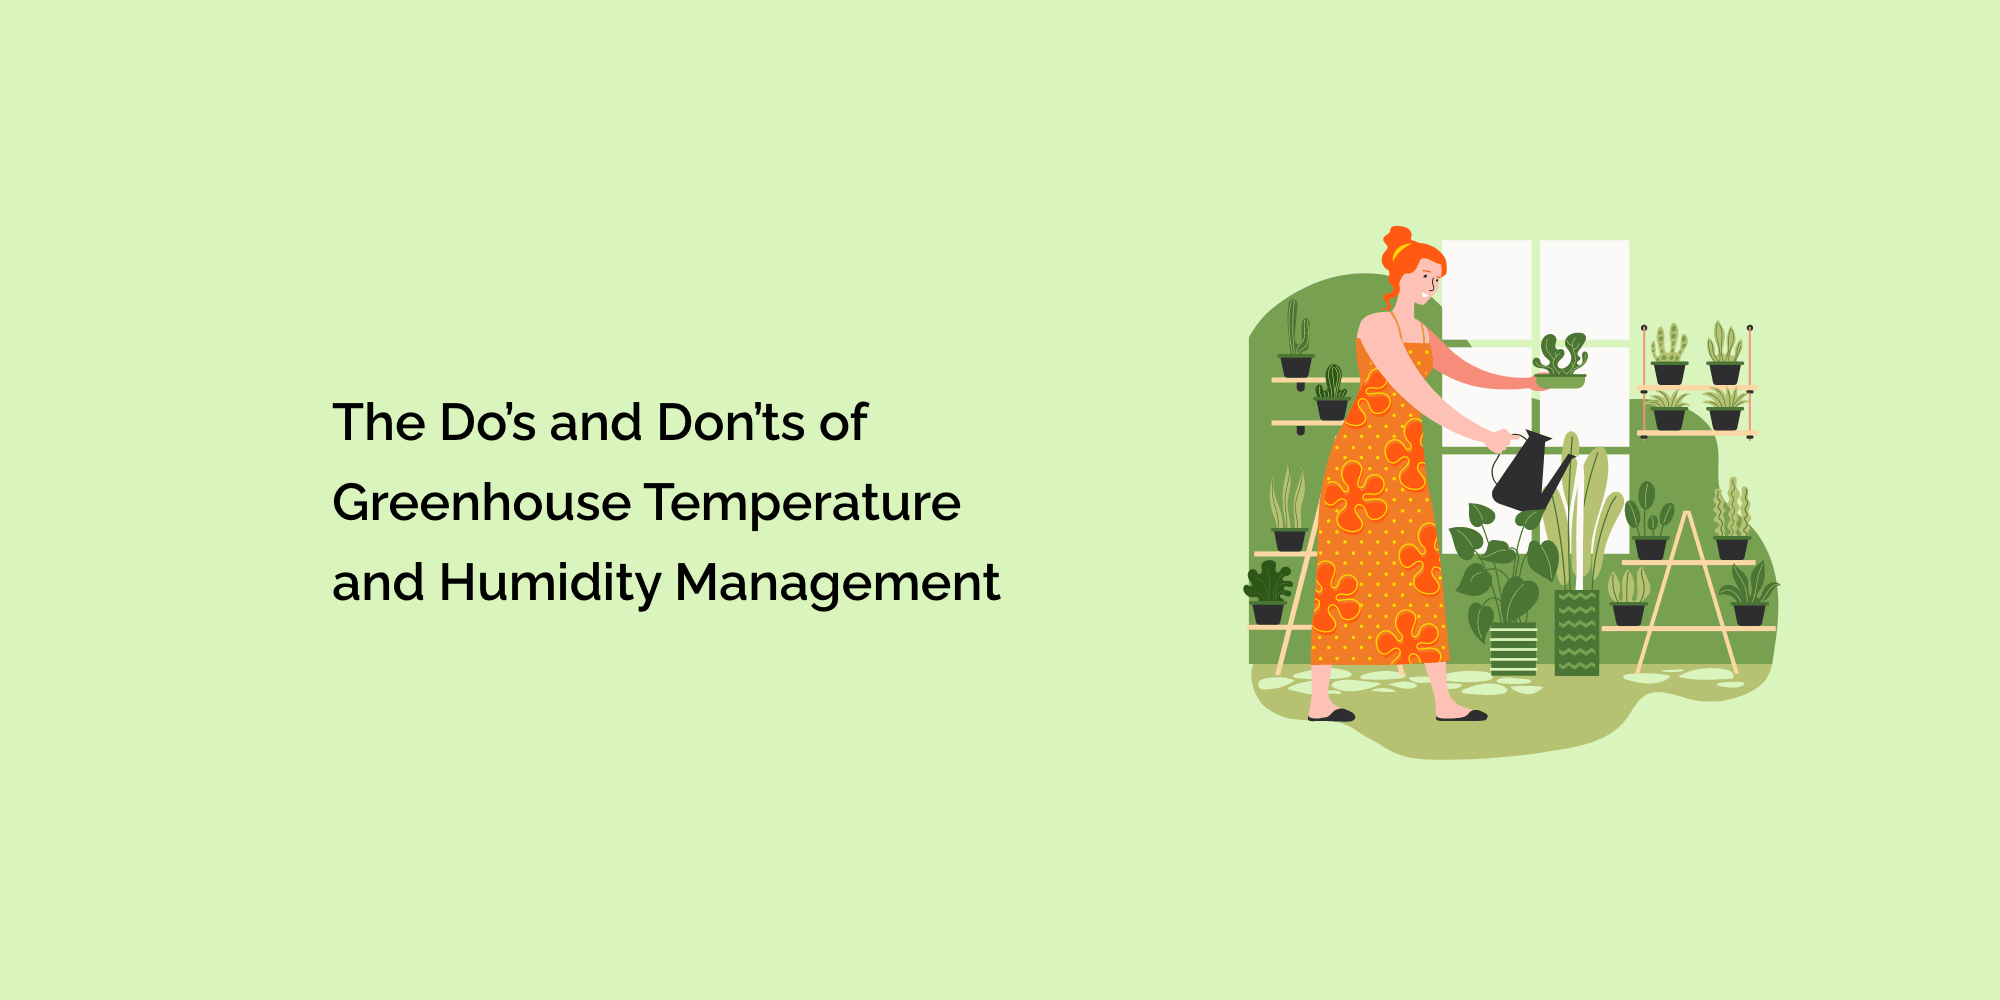 The Do's and Don'ts of Greenhouse Temperature and Humidity Management